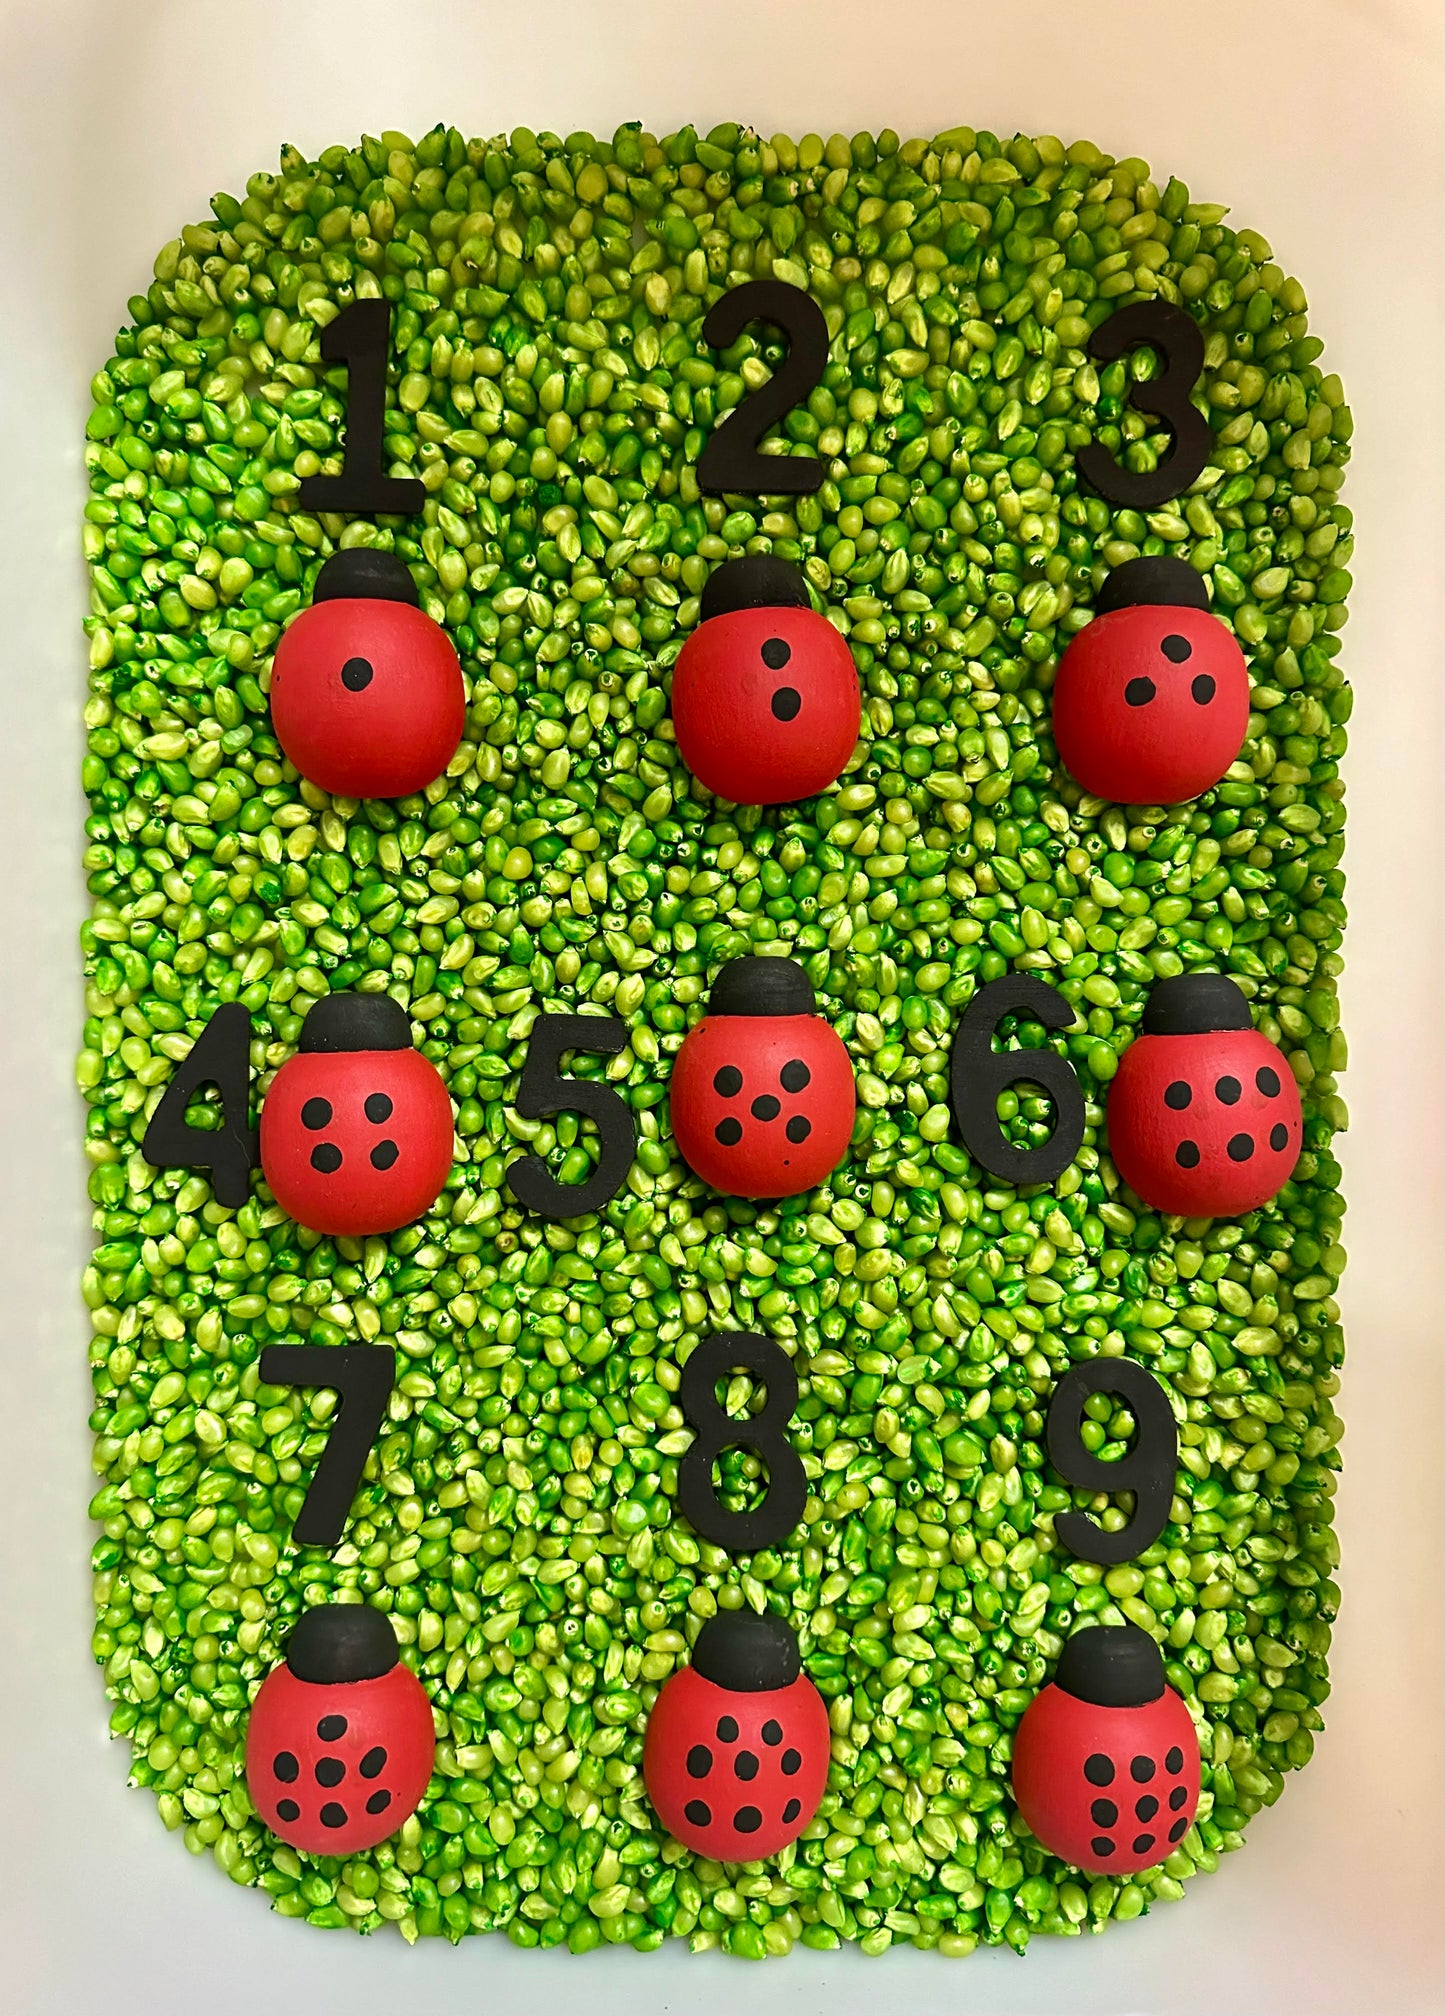 Lady Bug Counting Kit by Sensory Made Simple